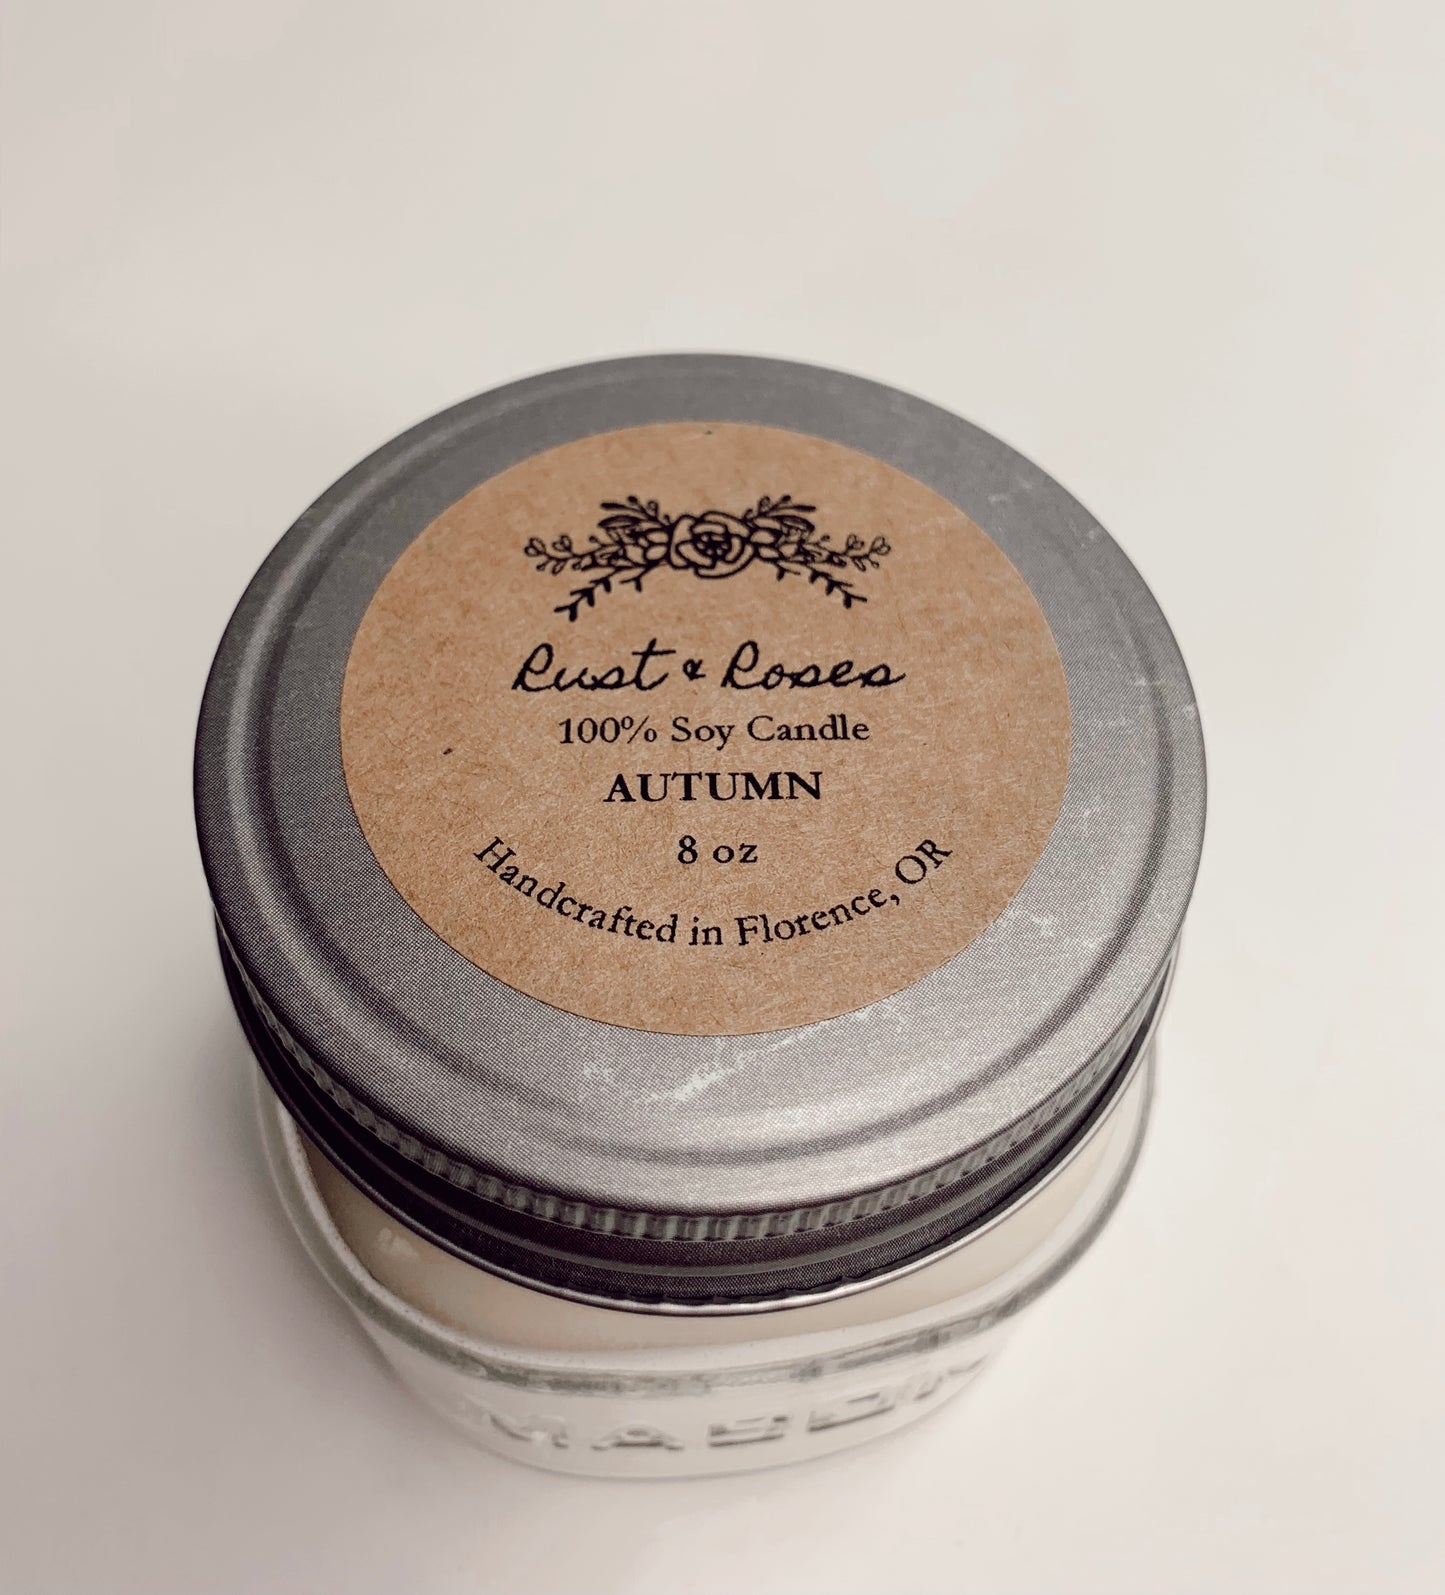 Rust & Roses Soy Candle